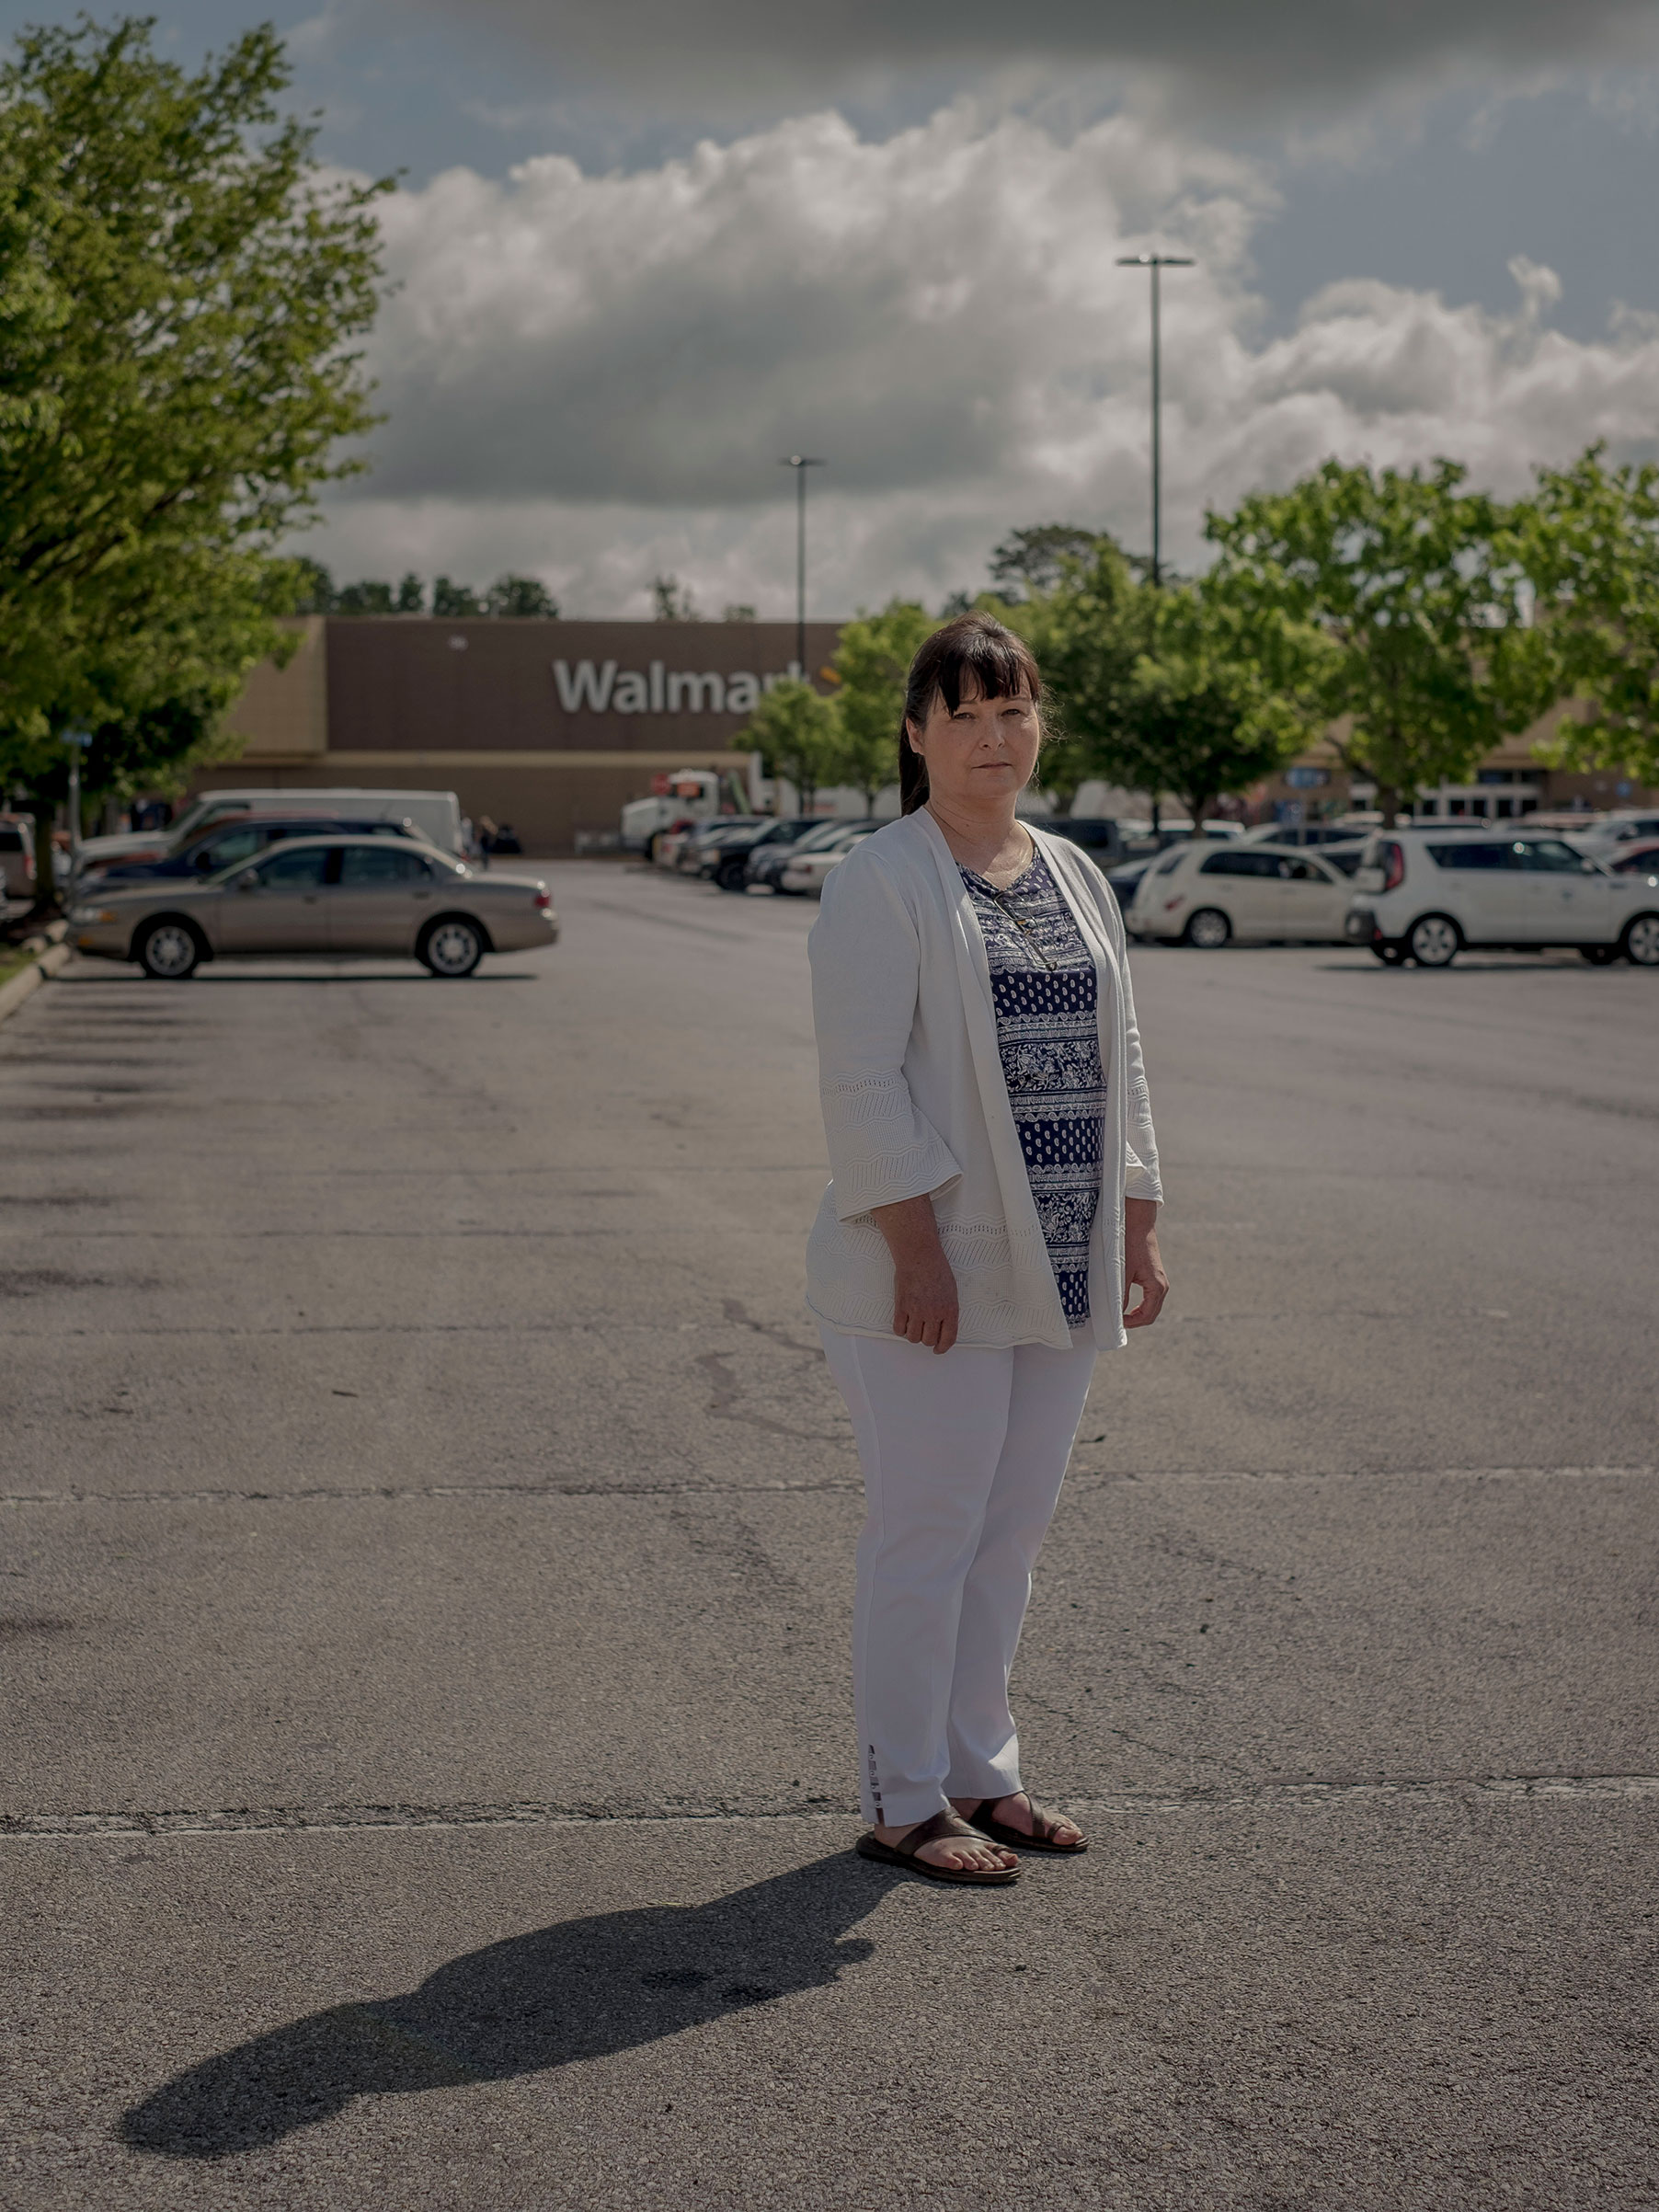 Baby Dwelling automaton Years Later, Women Still Fight Walmart Over Discrimination | Time